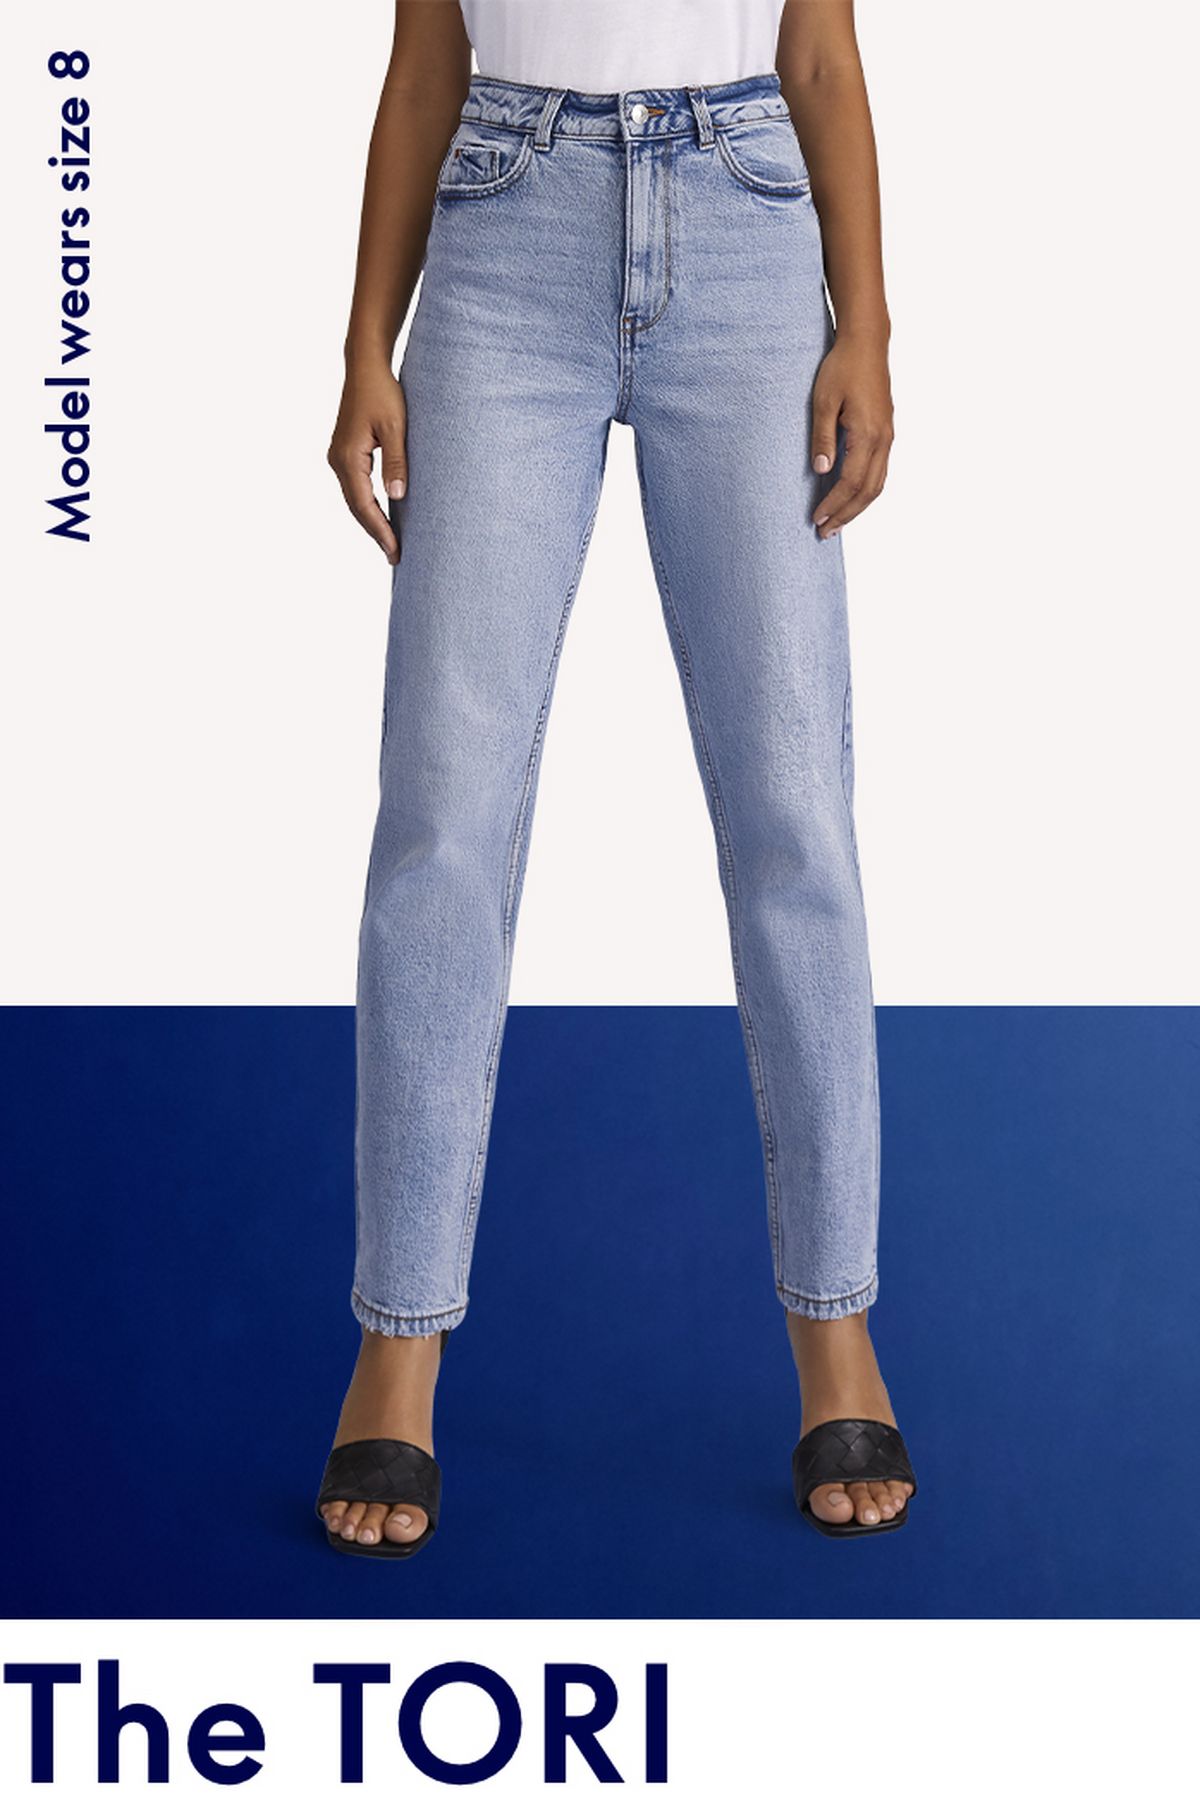 Women jeans styles collection. Denim fashion, types of female